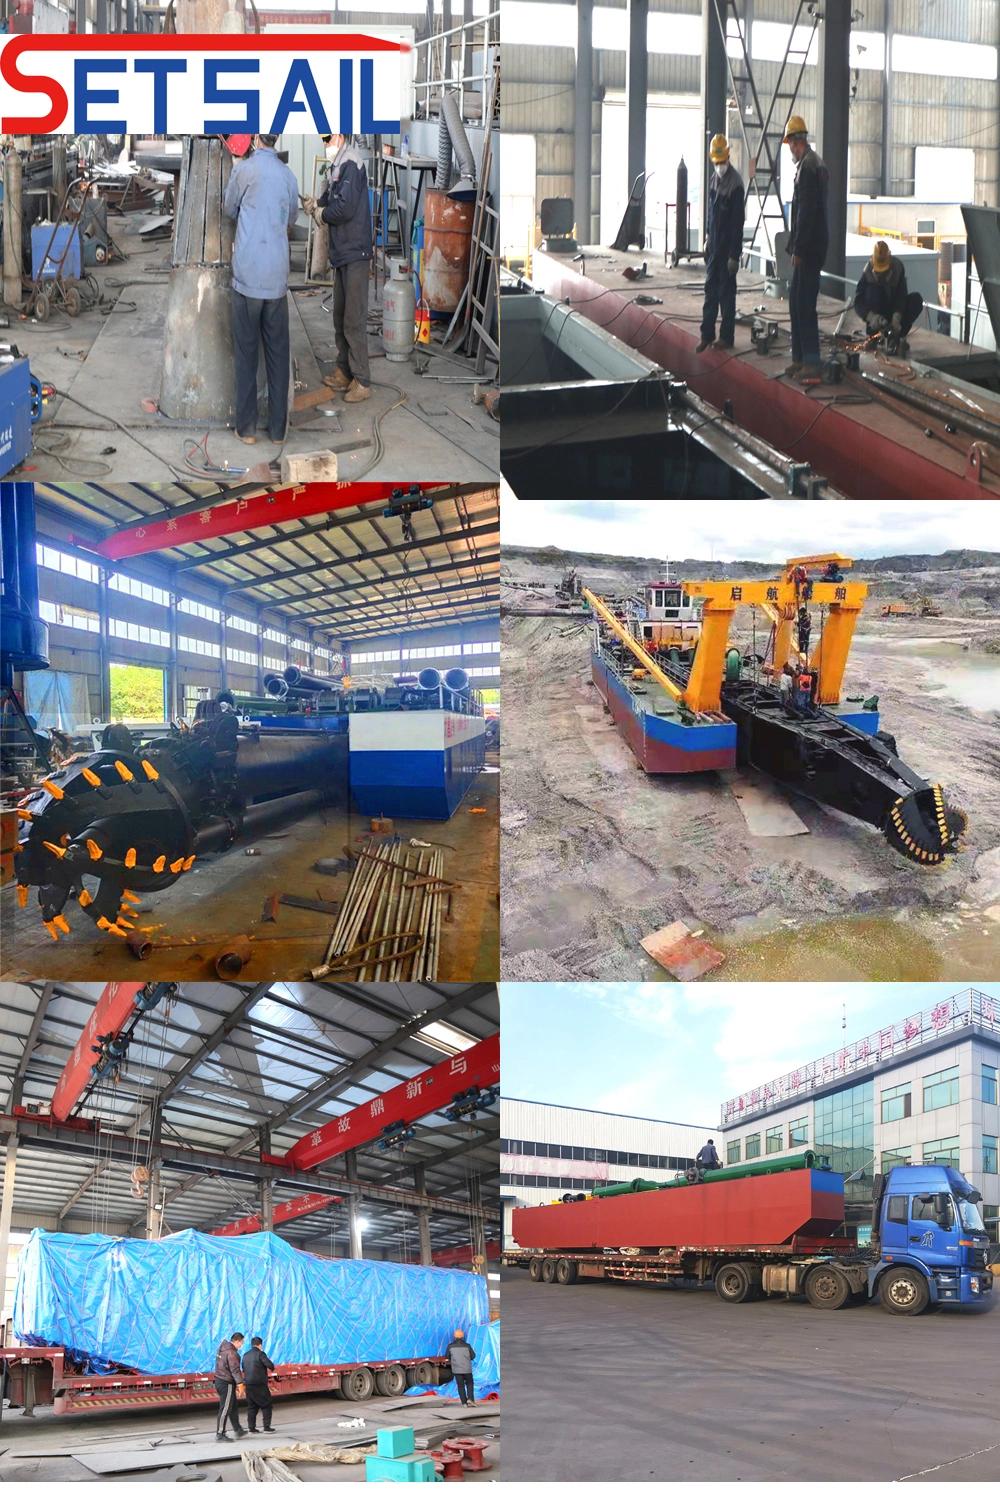 Capacity 1400m3 Water Flow 7000m3 hydraulic Cutter Suction Dredger